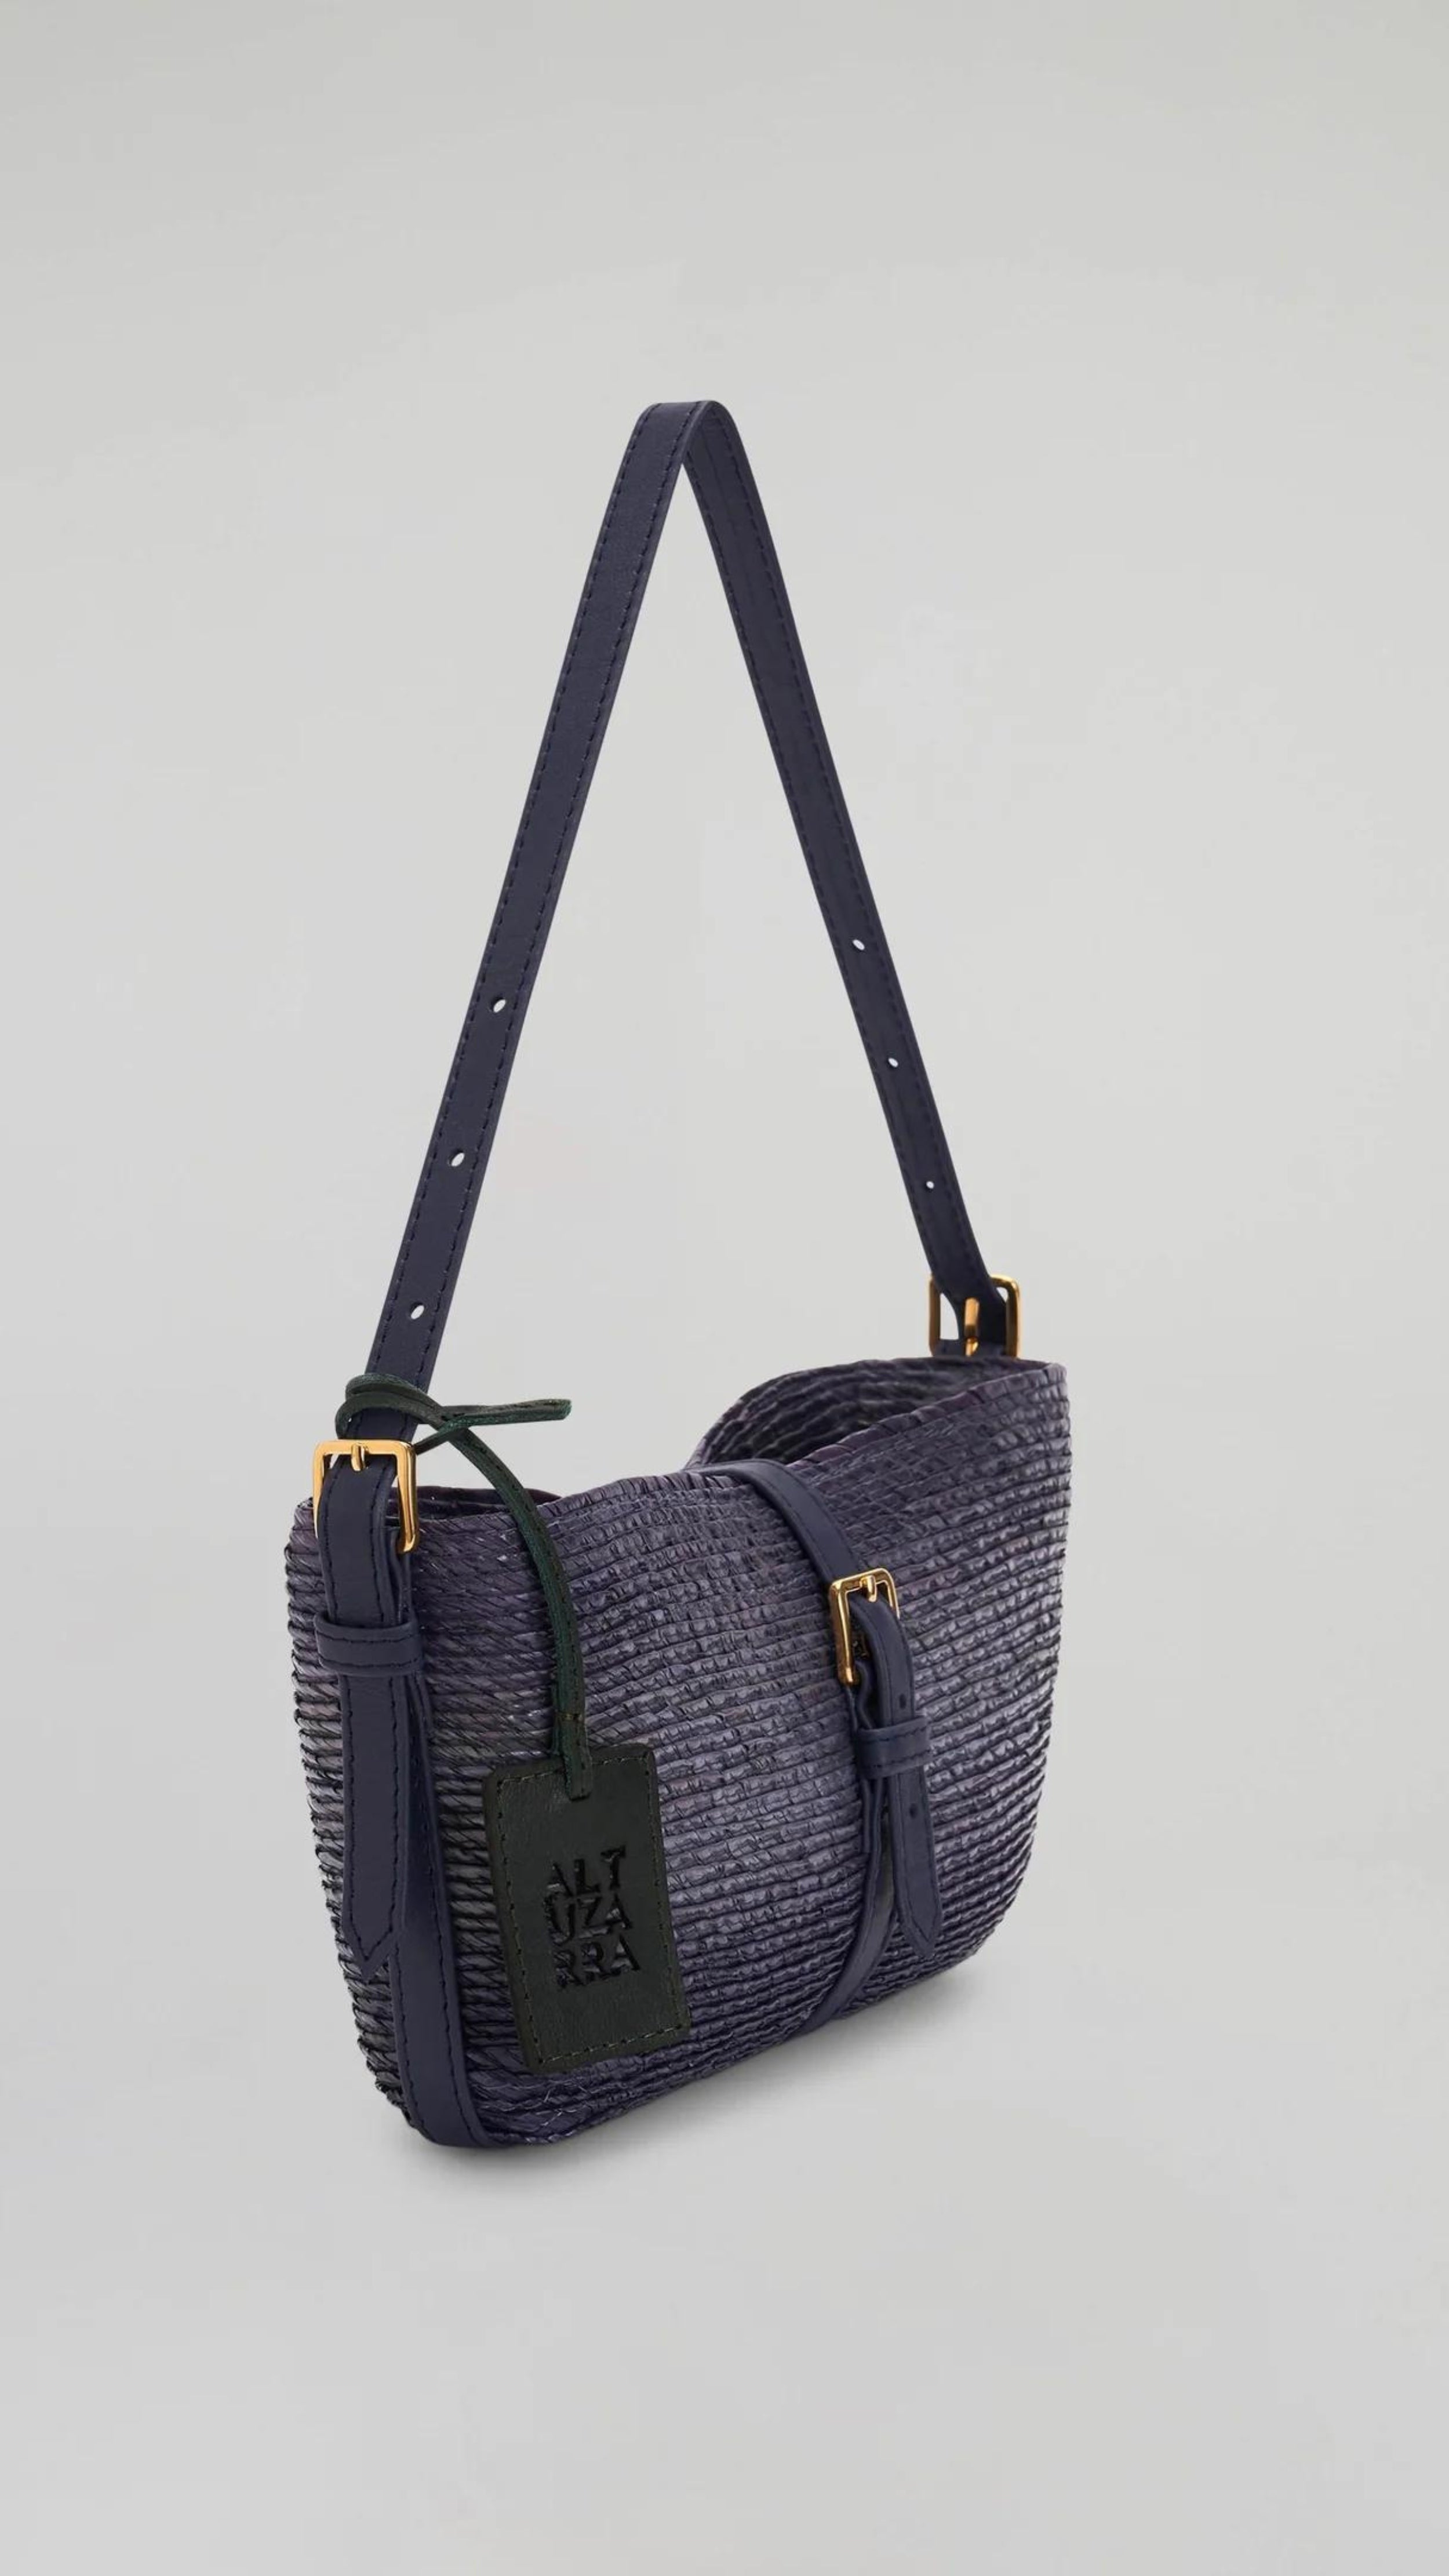 Altruzarra WATERMILL SHOULDER BAG in Murex. Raffia summer purse in deep blue tones and navy blue leather detailing and gold hardware. Shown from the front side. Available at Experience 27 Madrid Spain.